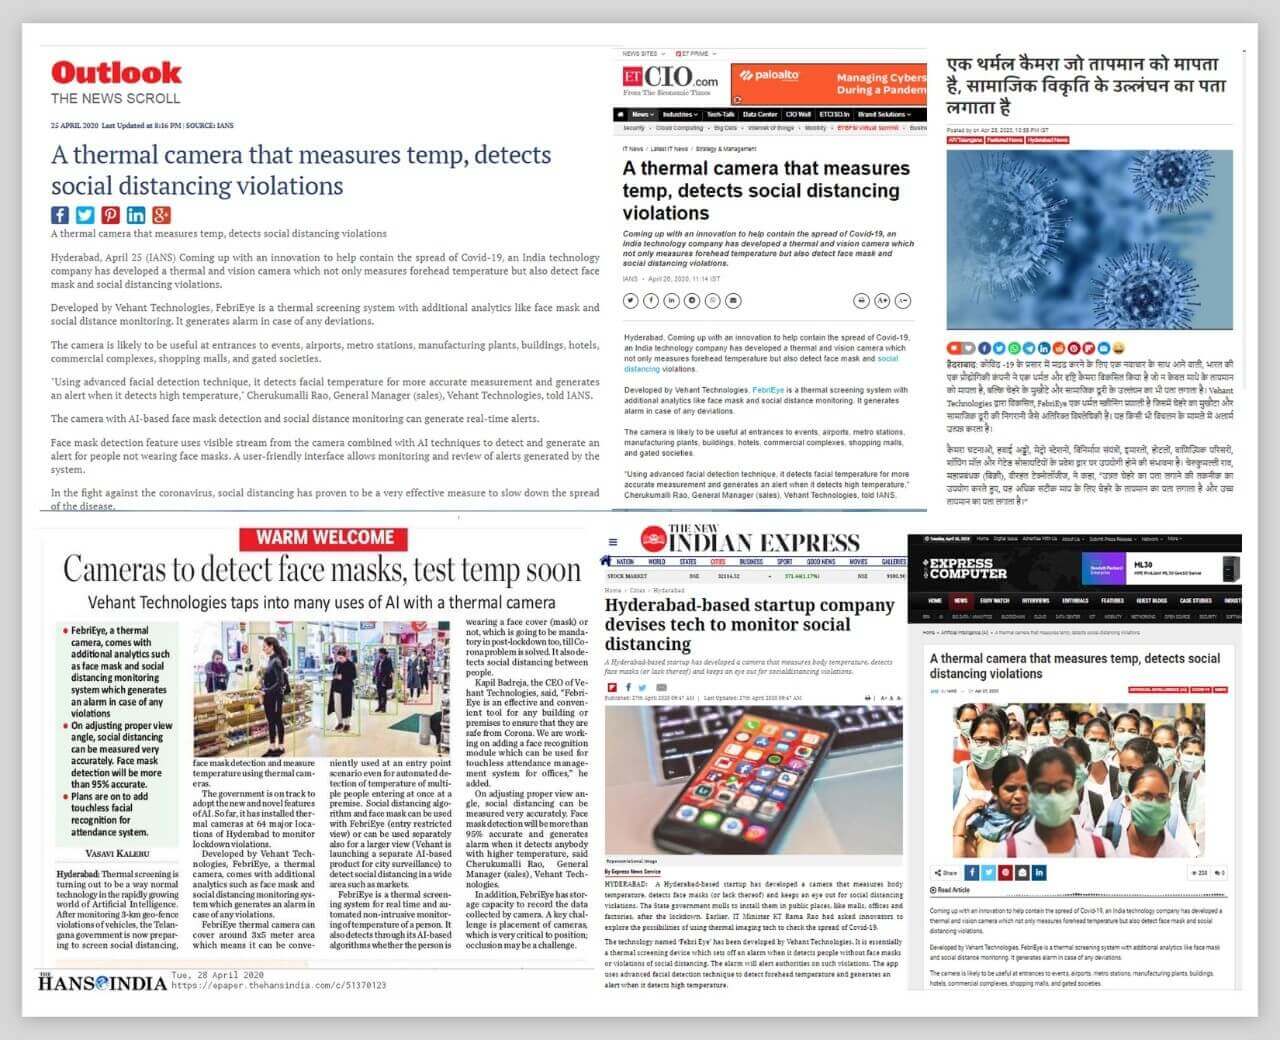 Vehant's FebriEye™ - AI based Thermal Temprature Screening System launched last week received extensive coverage on leading news platforms